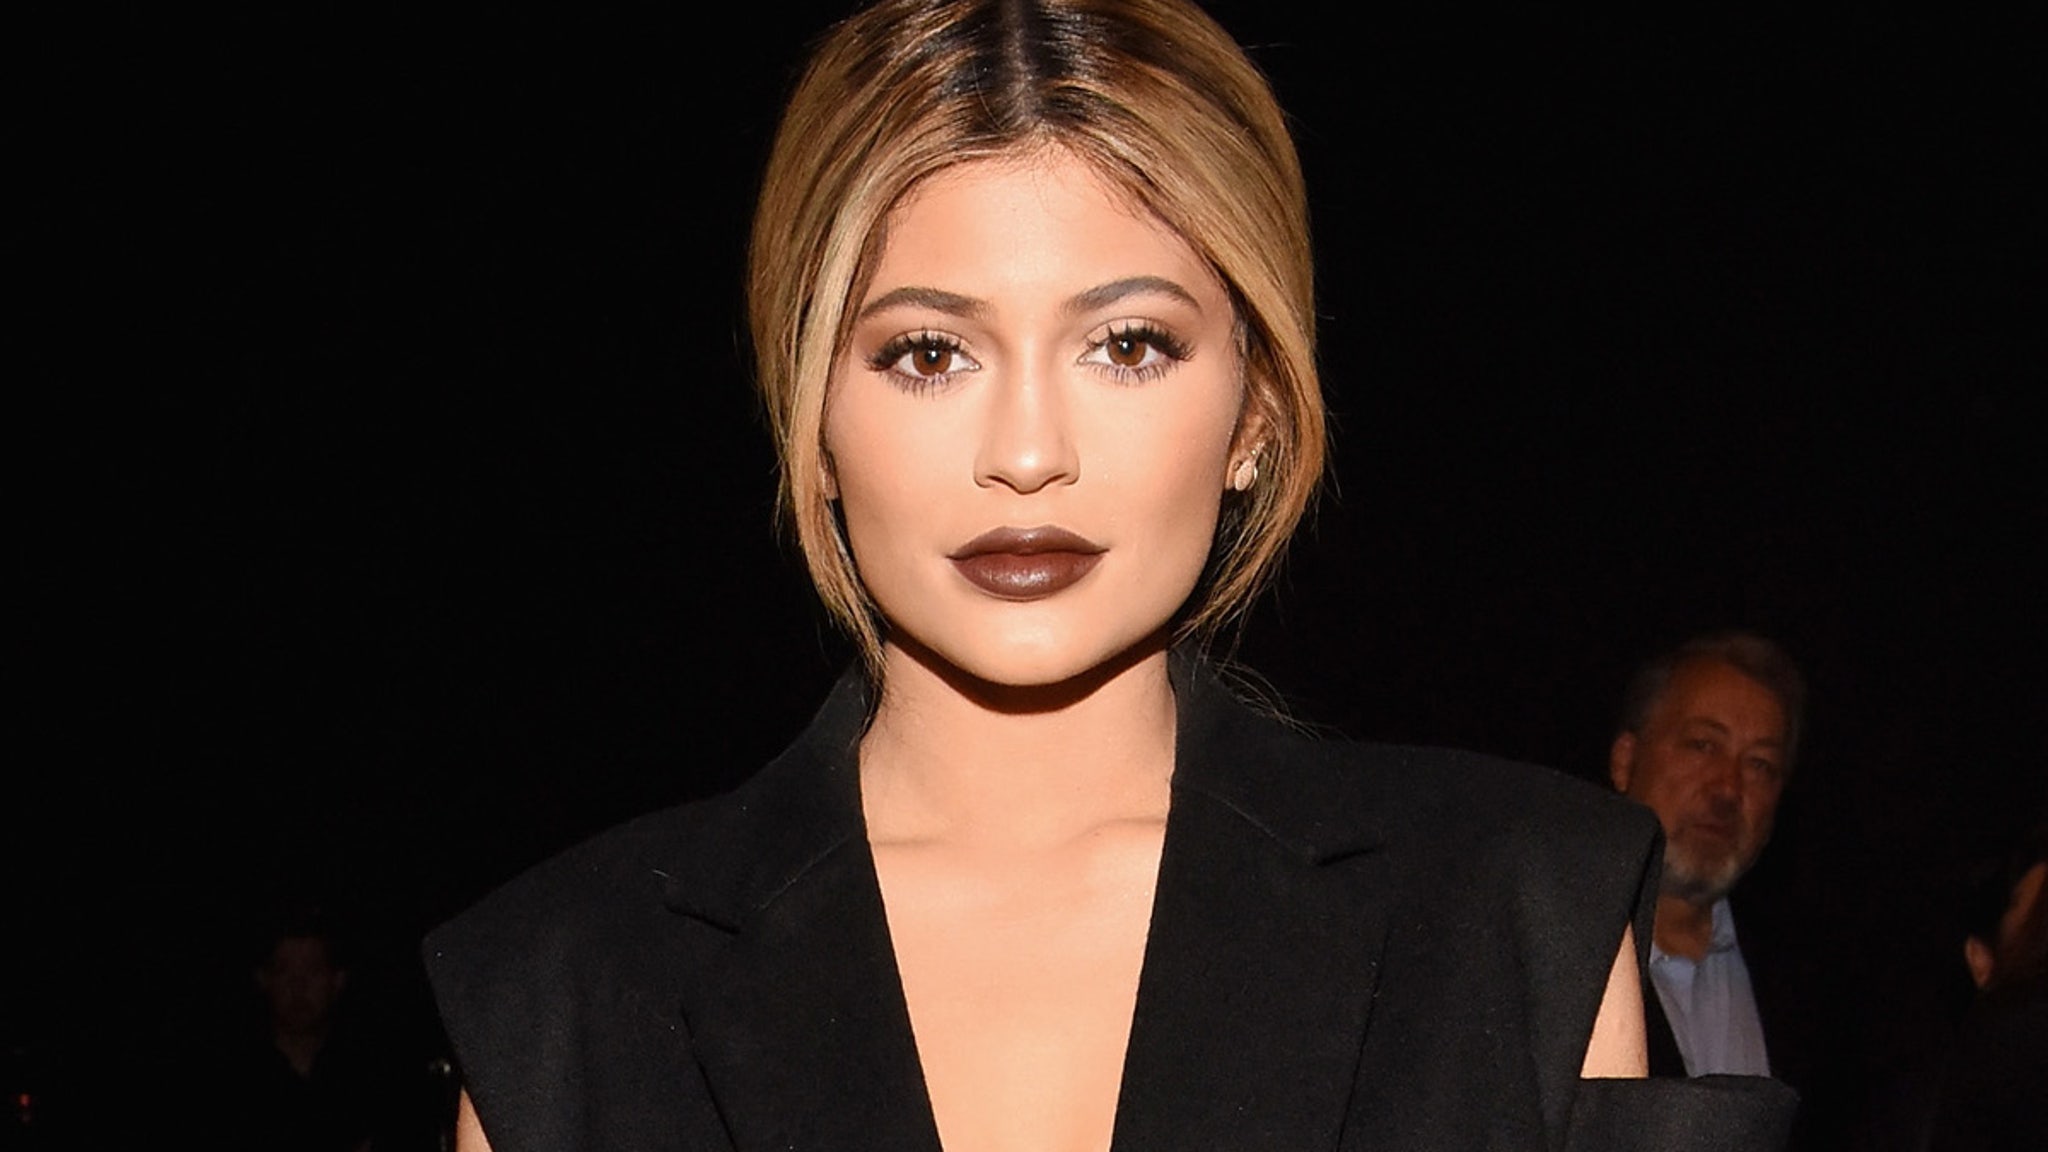 Kylie Jenner Dons Conservative But Ridiculous Look While Pregnant 